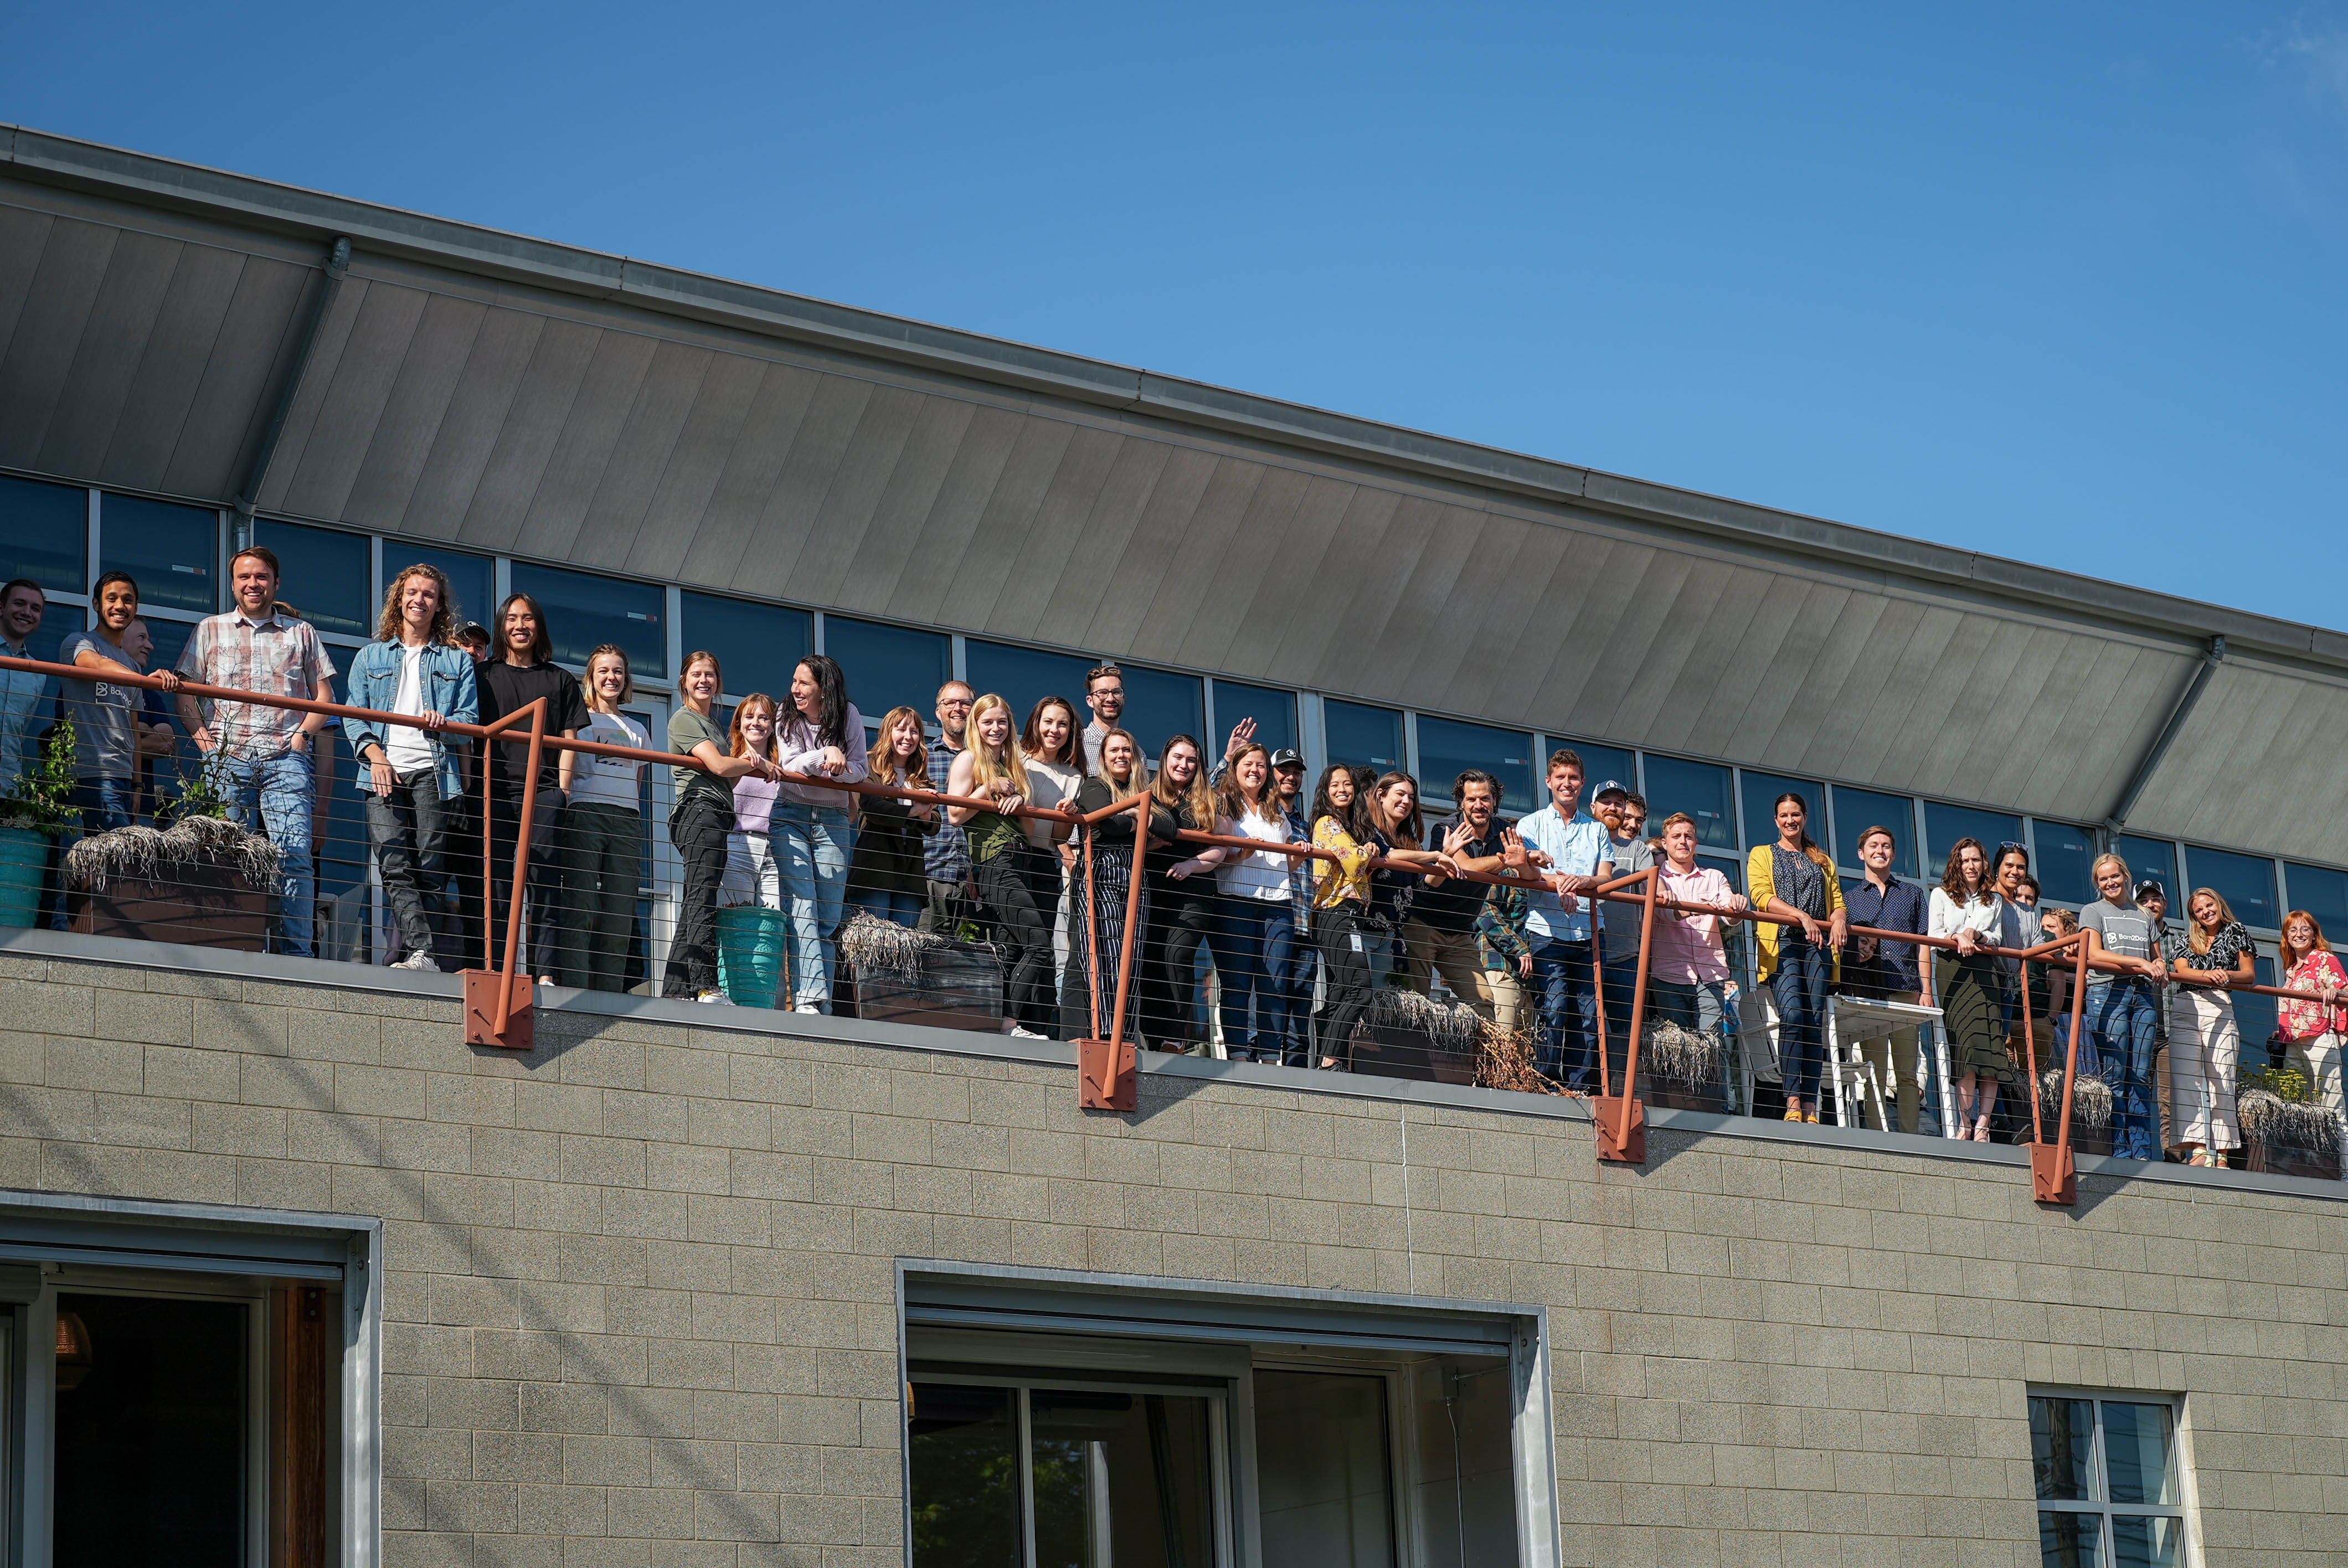 barn2door's employees pose in a group picture on a balcony